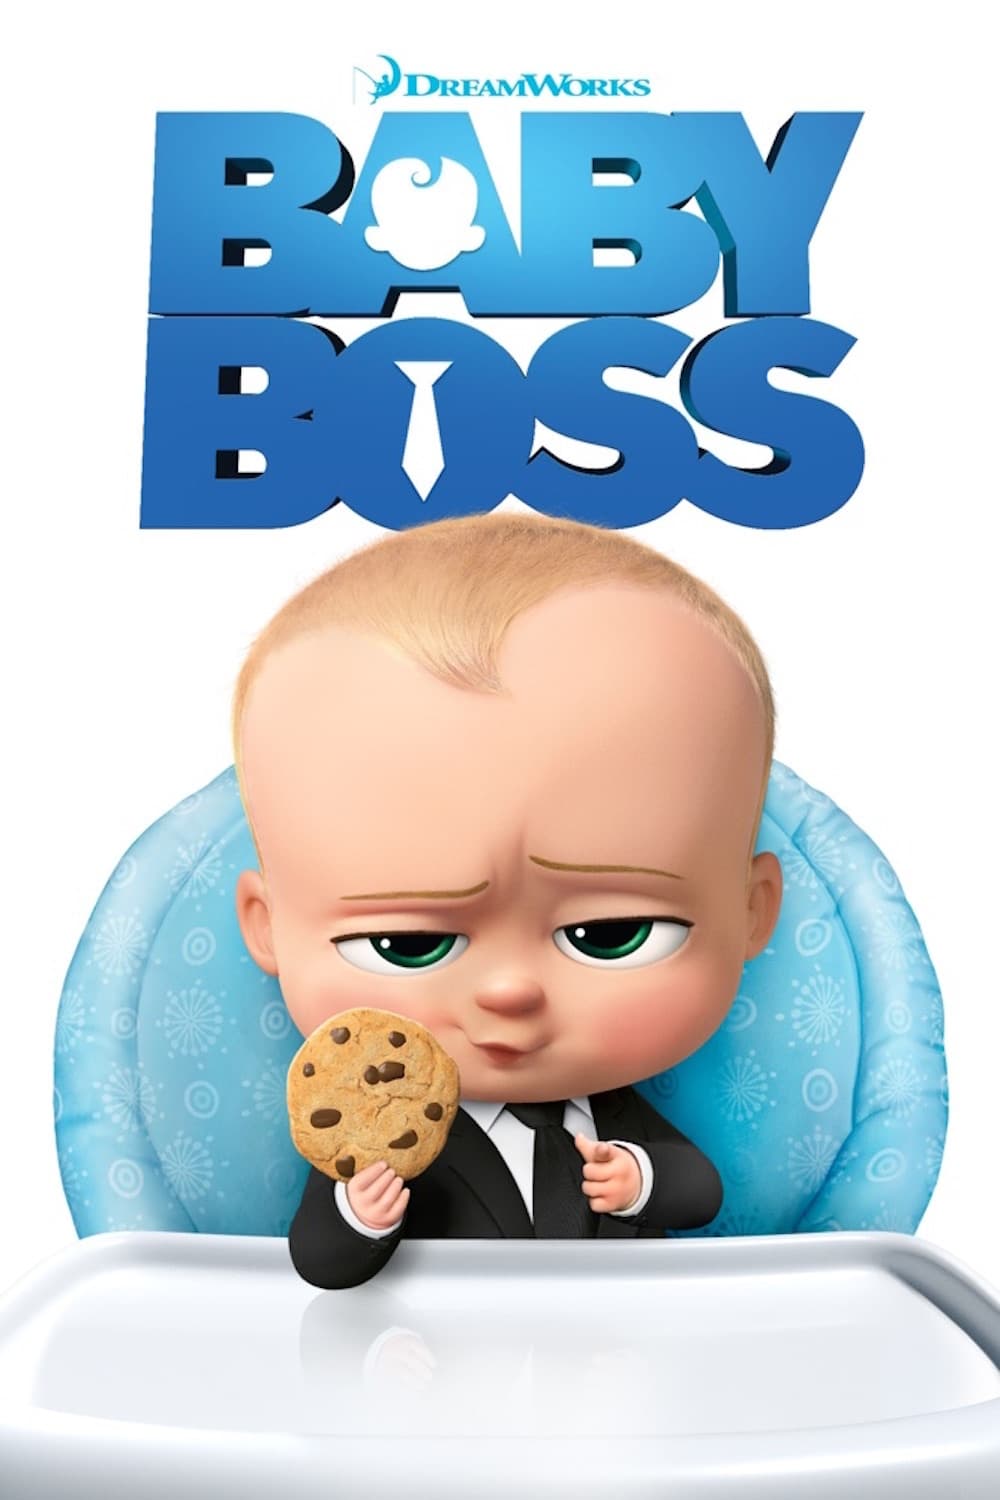 The Boss Baby POSTER